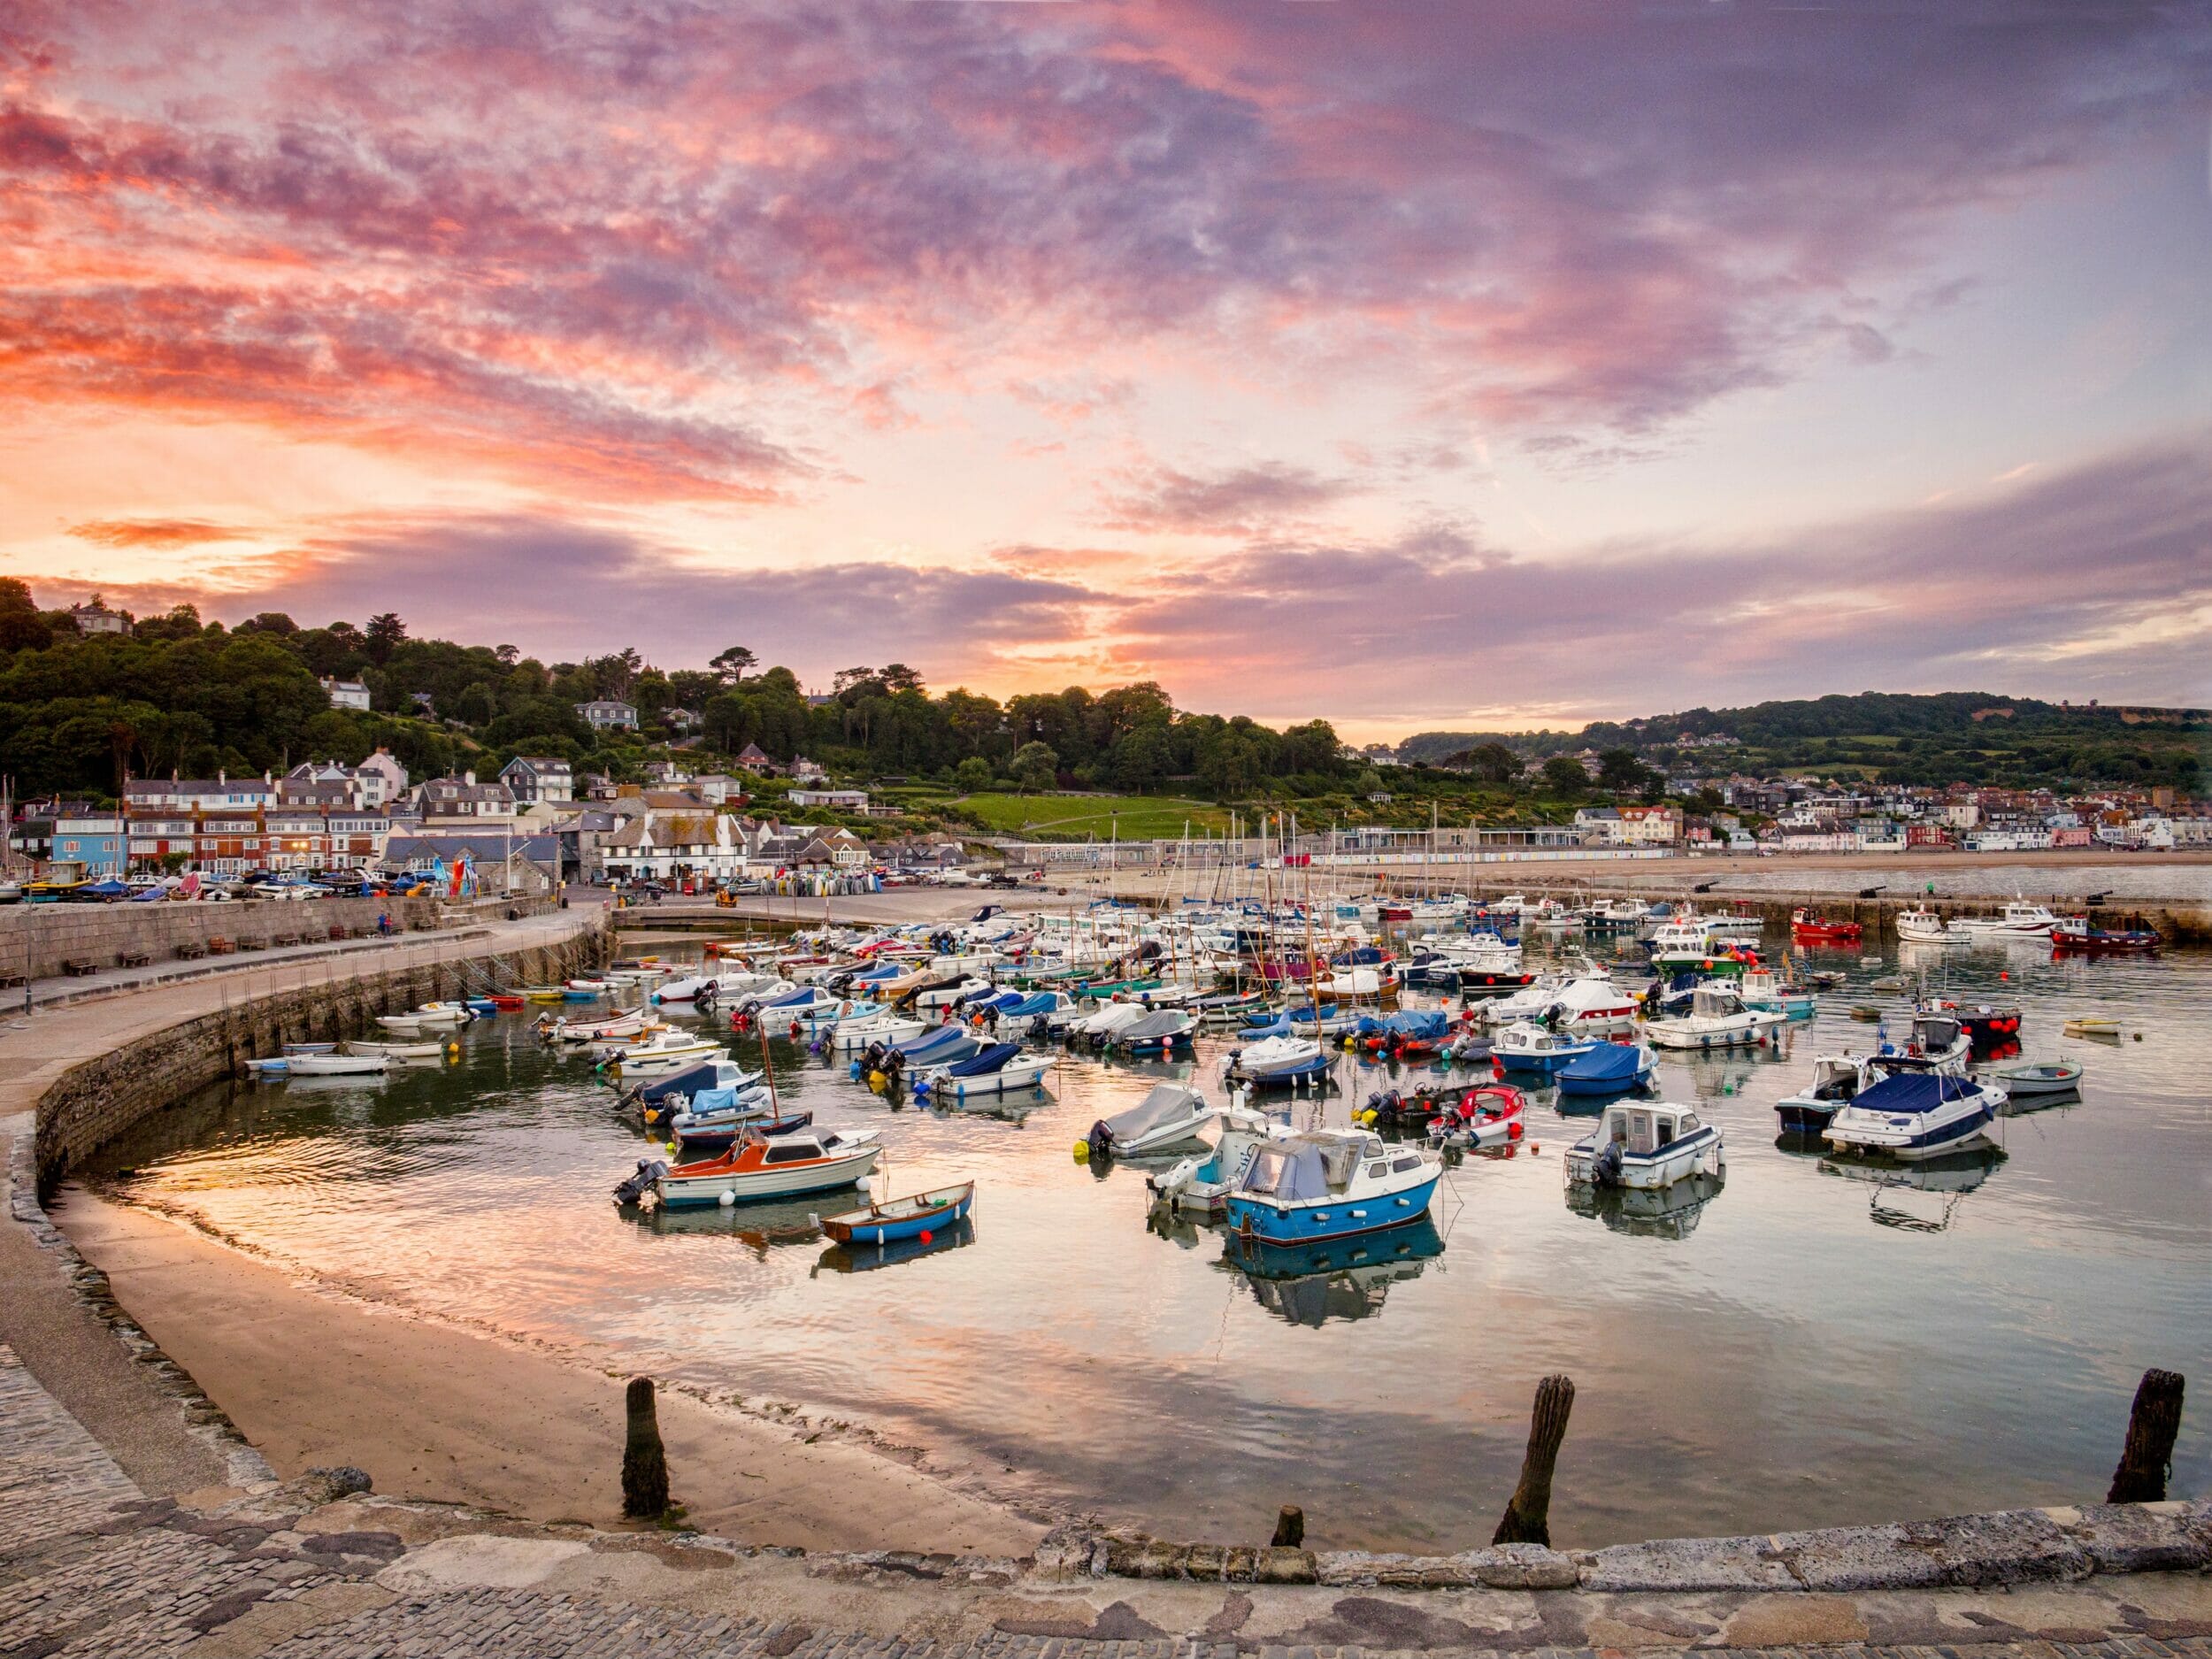 From Beaches to Coastal Towns: Explore the South Coast for your UK Holiday